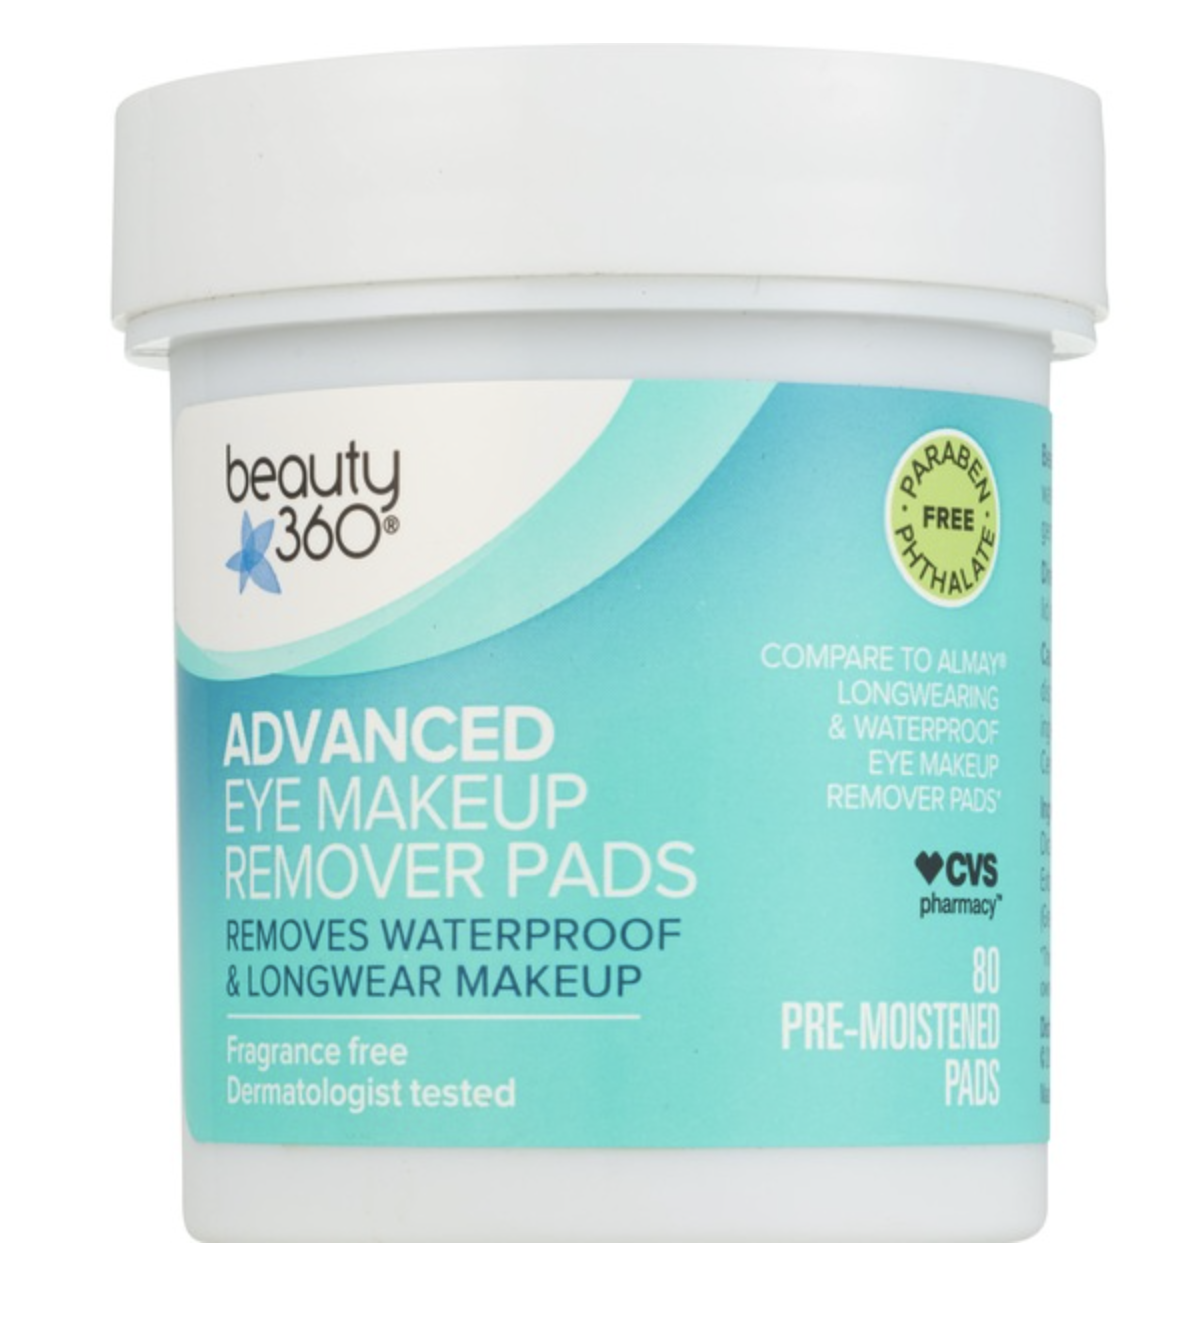 Fragrance-free, dermatologist-tested pads that remove waterproof and longwear makeup